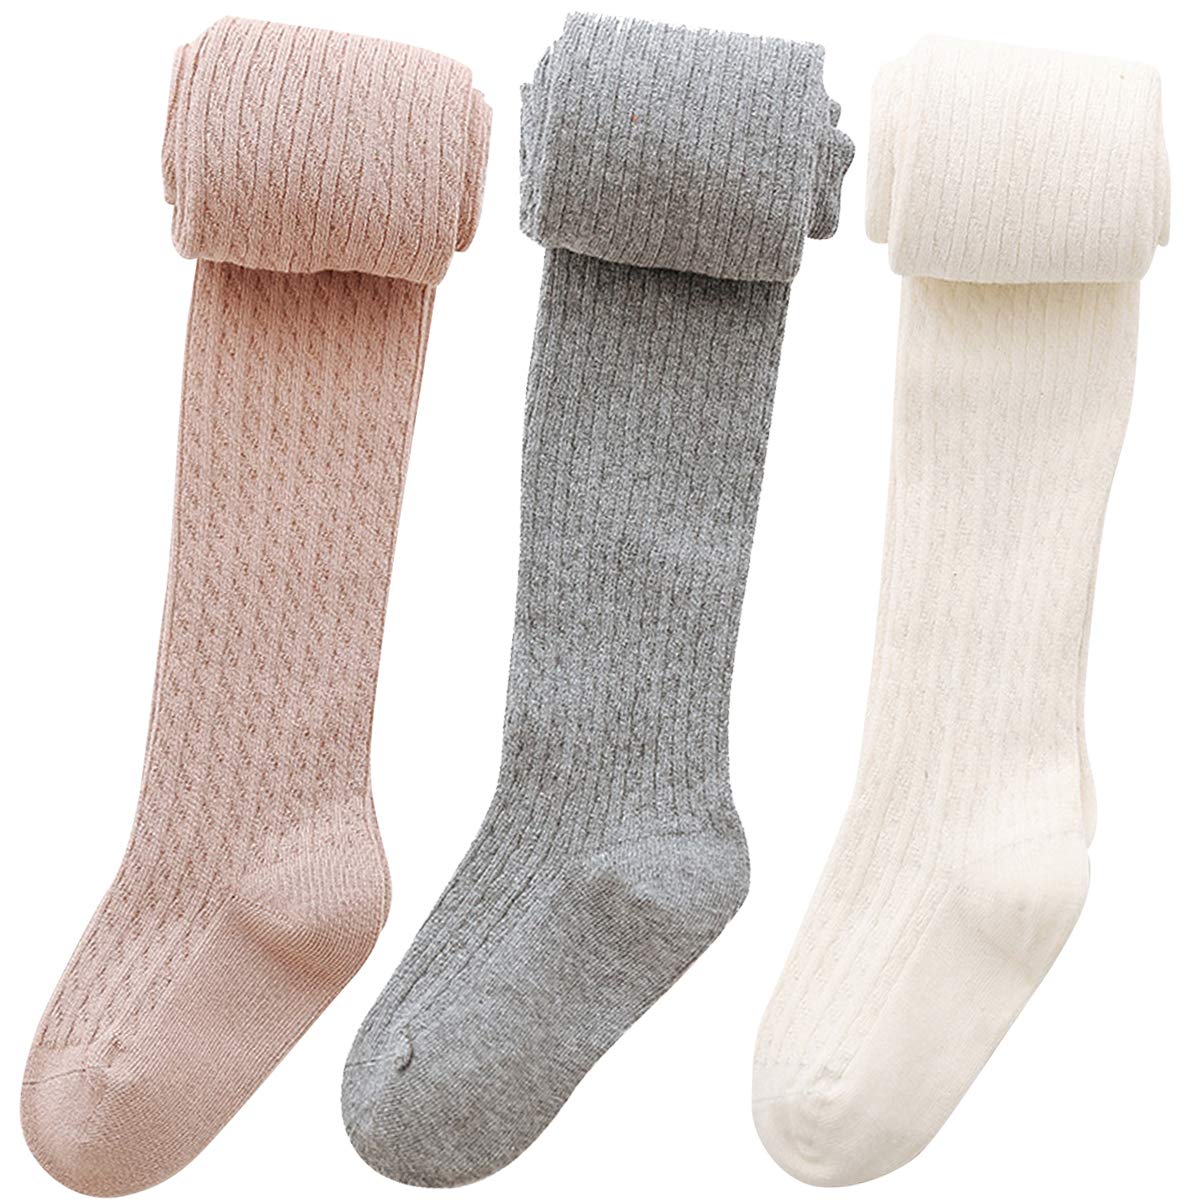 vanberfia Baby Girls Tights Cable Knit Leggings Stockings 3 Pack Pantyhose Infants Toddlers 2-10T…